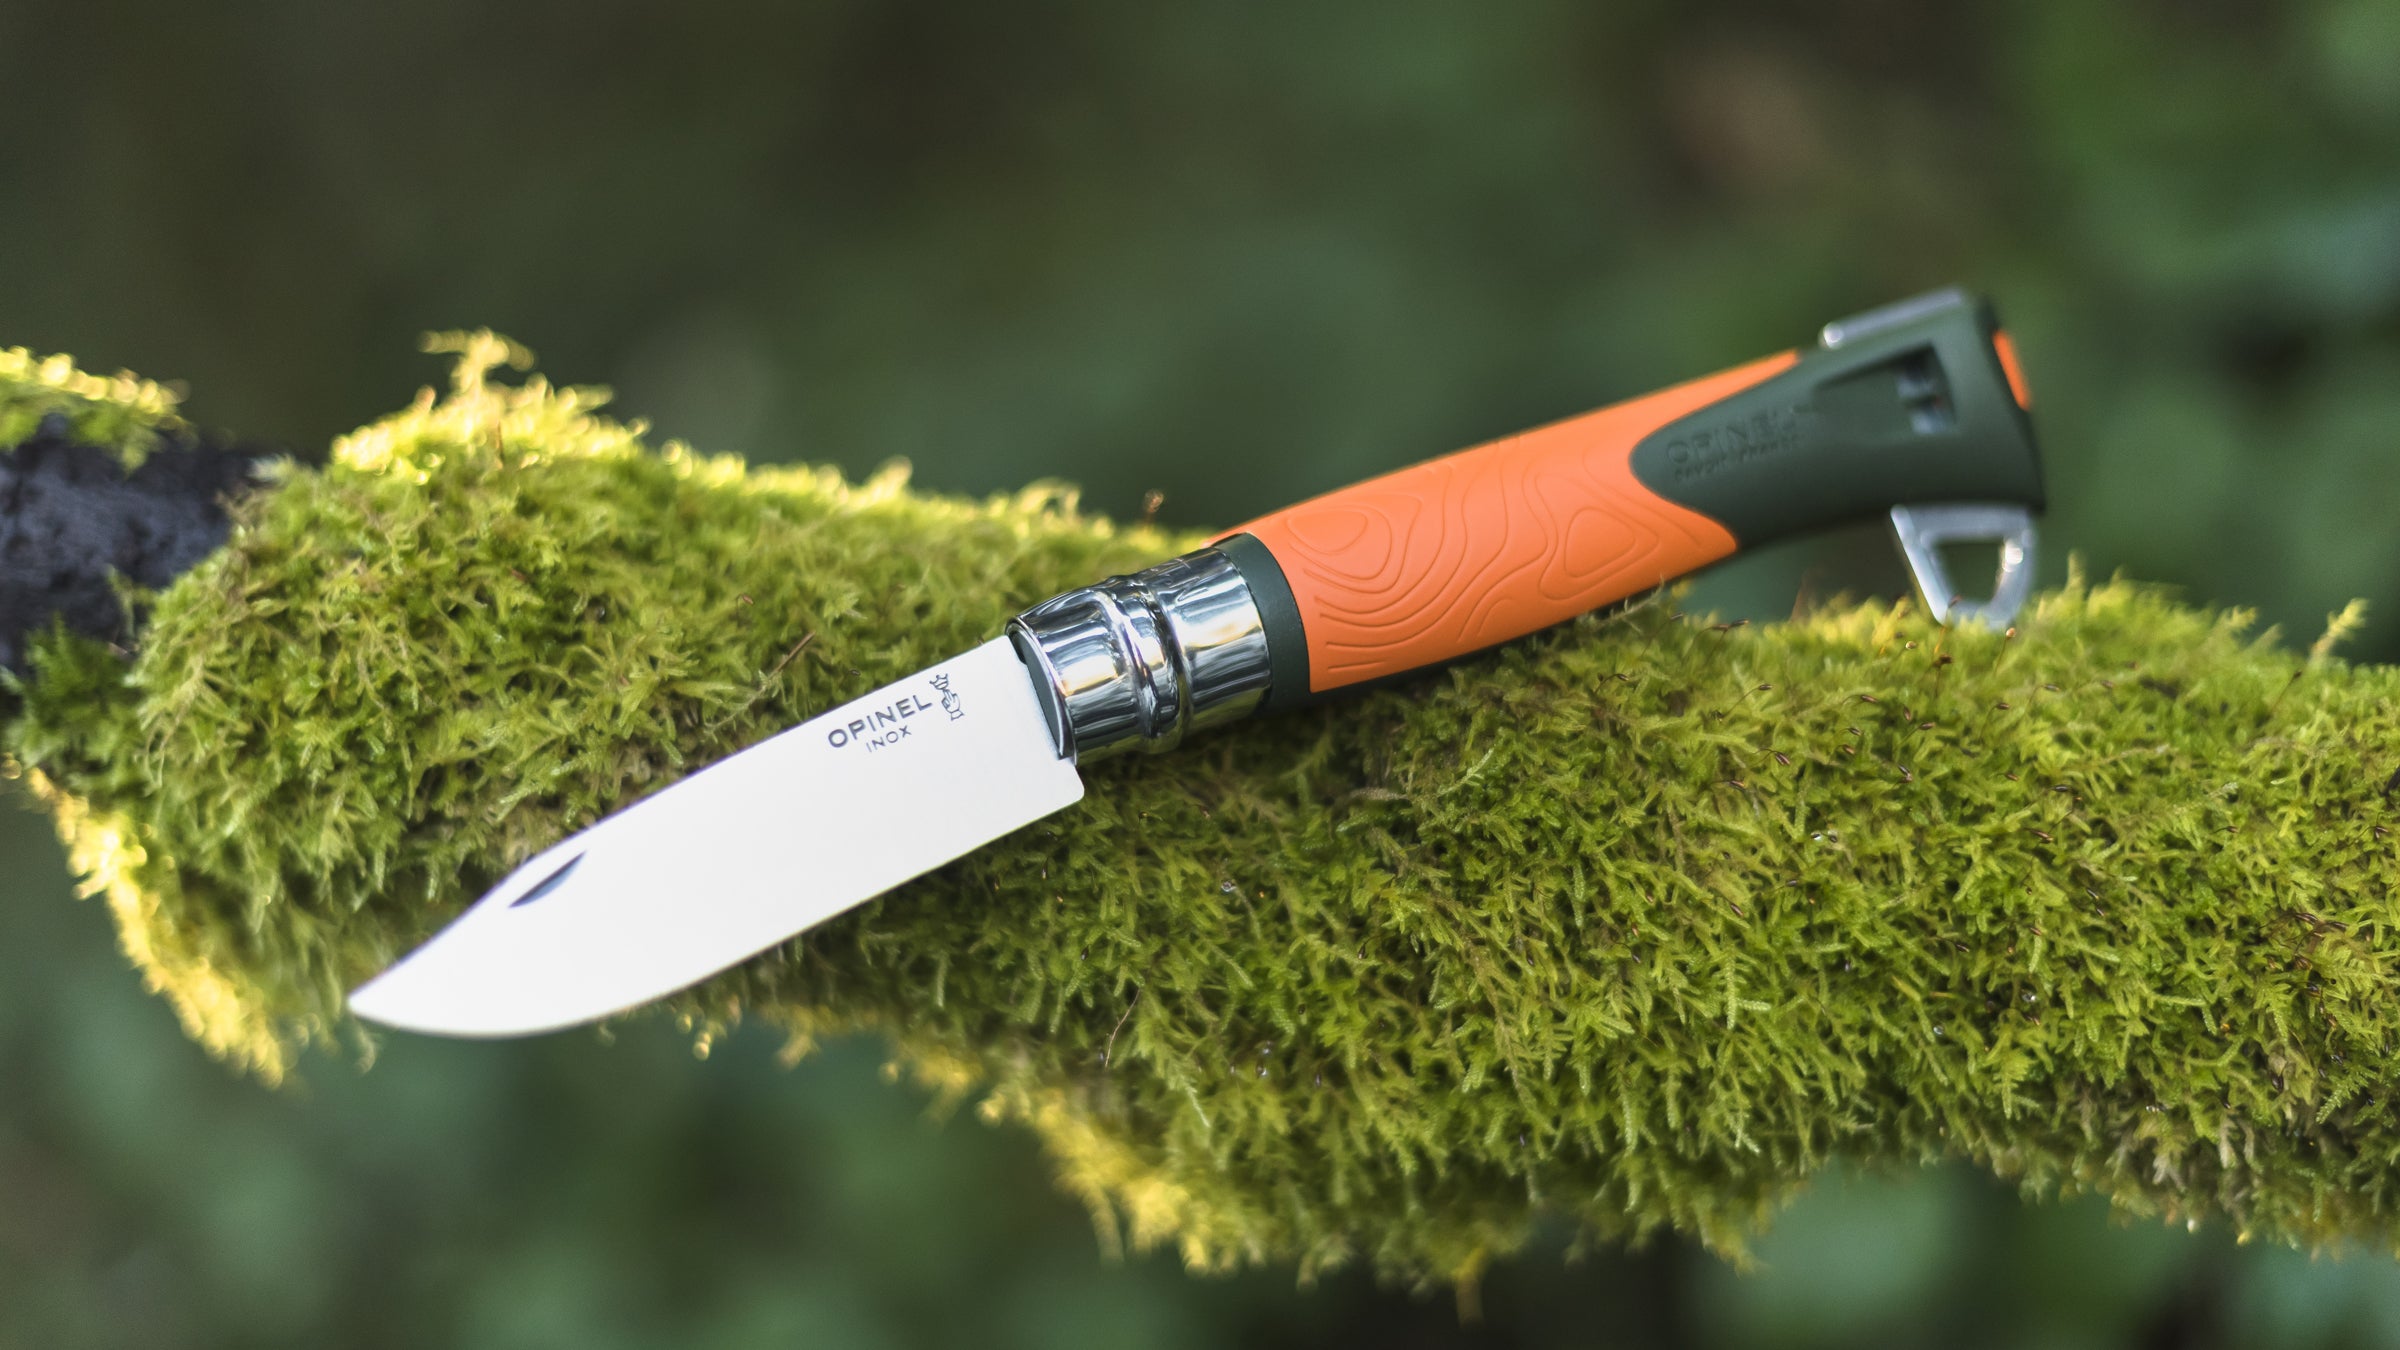 Opinel No12 Knife - Knives Tools